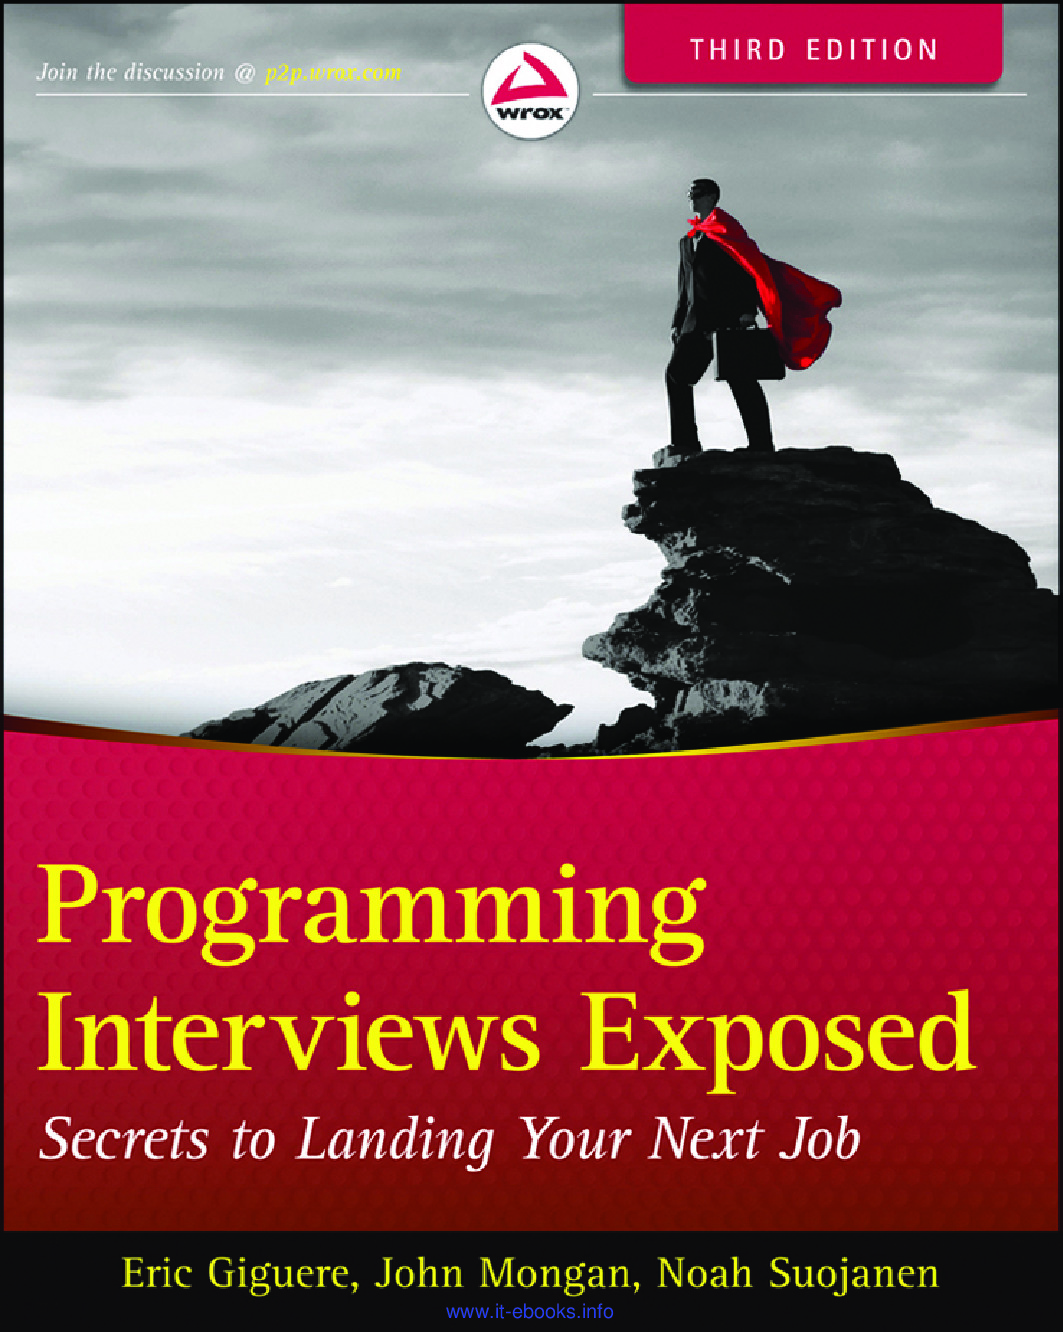 [INTERVIEW][Programming Interviews Exposed. Secrets to Landing Your Next Job, Third Edition – Secrets to Landing Your Next Job]